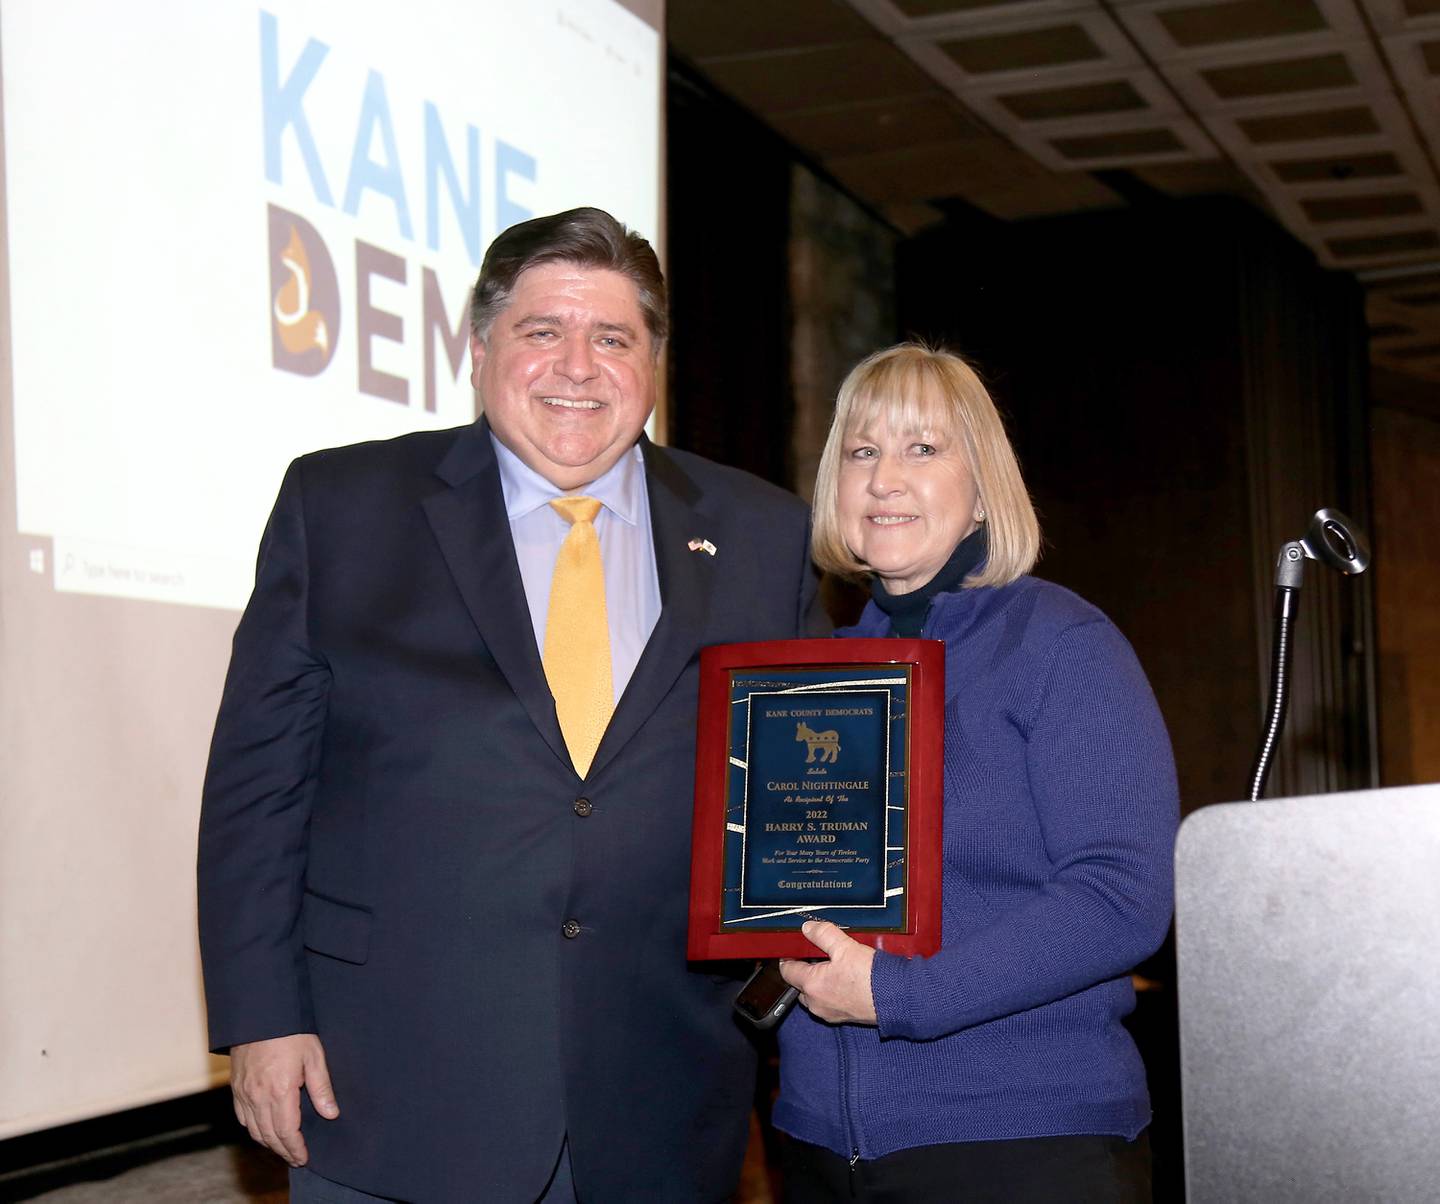 Governor JB Pritzker and the 2022 recipient of the Harry S. Truman Award, Carol Nightingale on Sunday, Feb. 27, 2022 at Two Brothers Round House in Aurora.